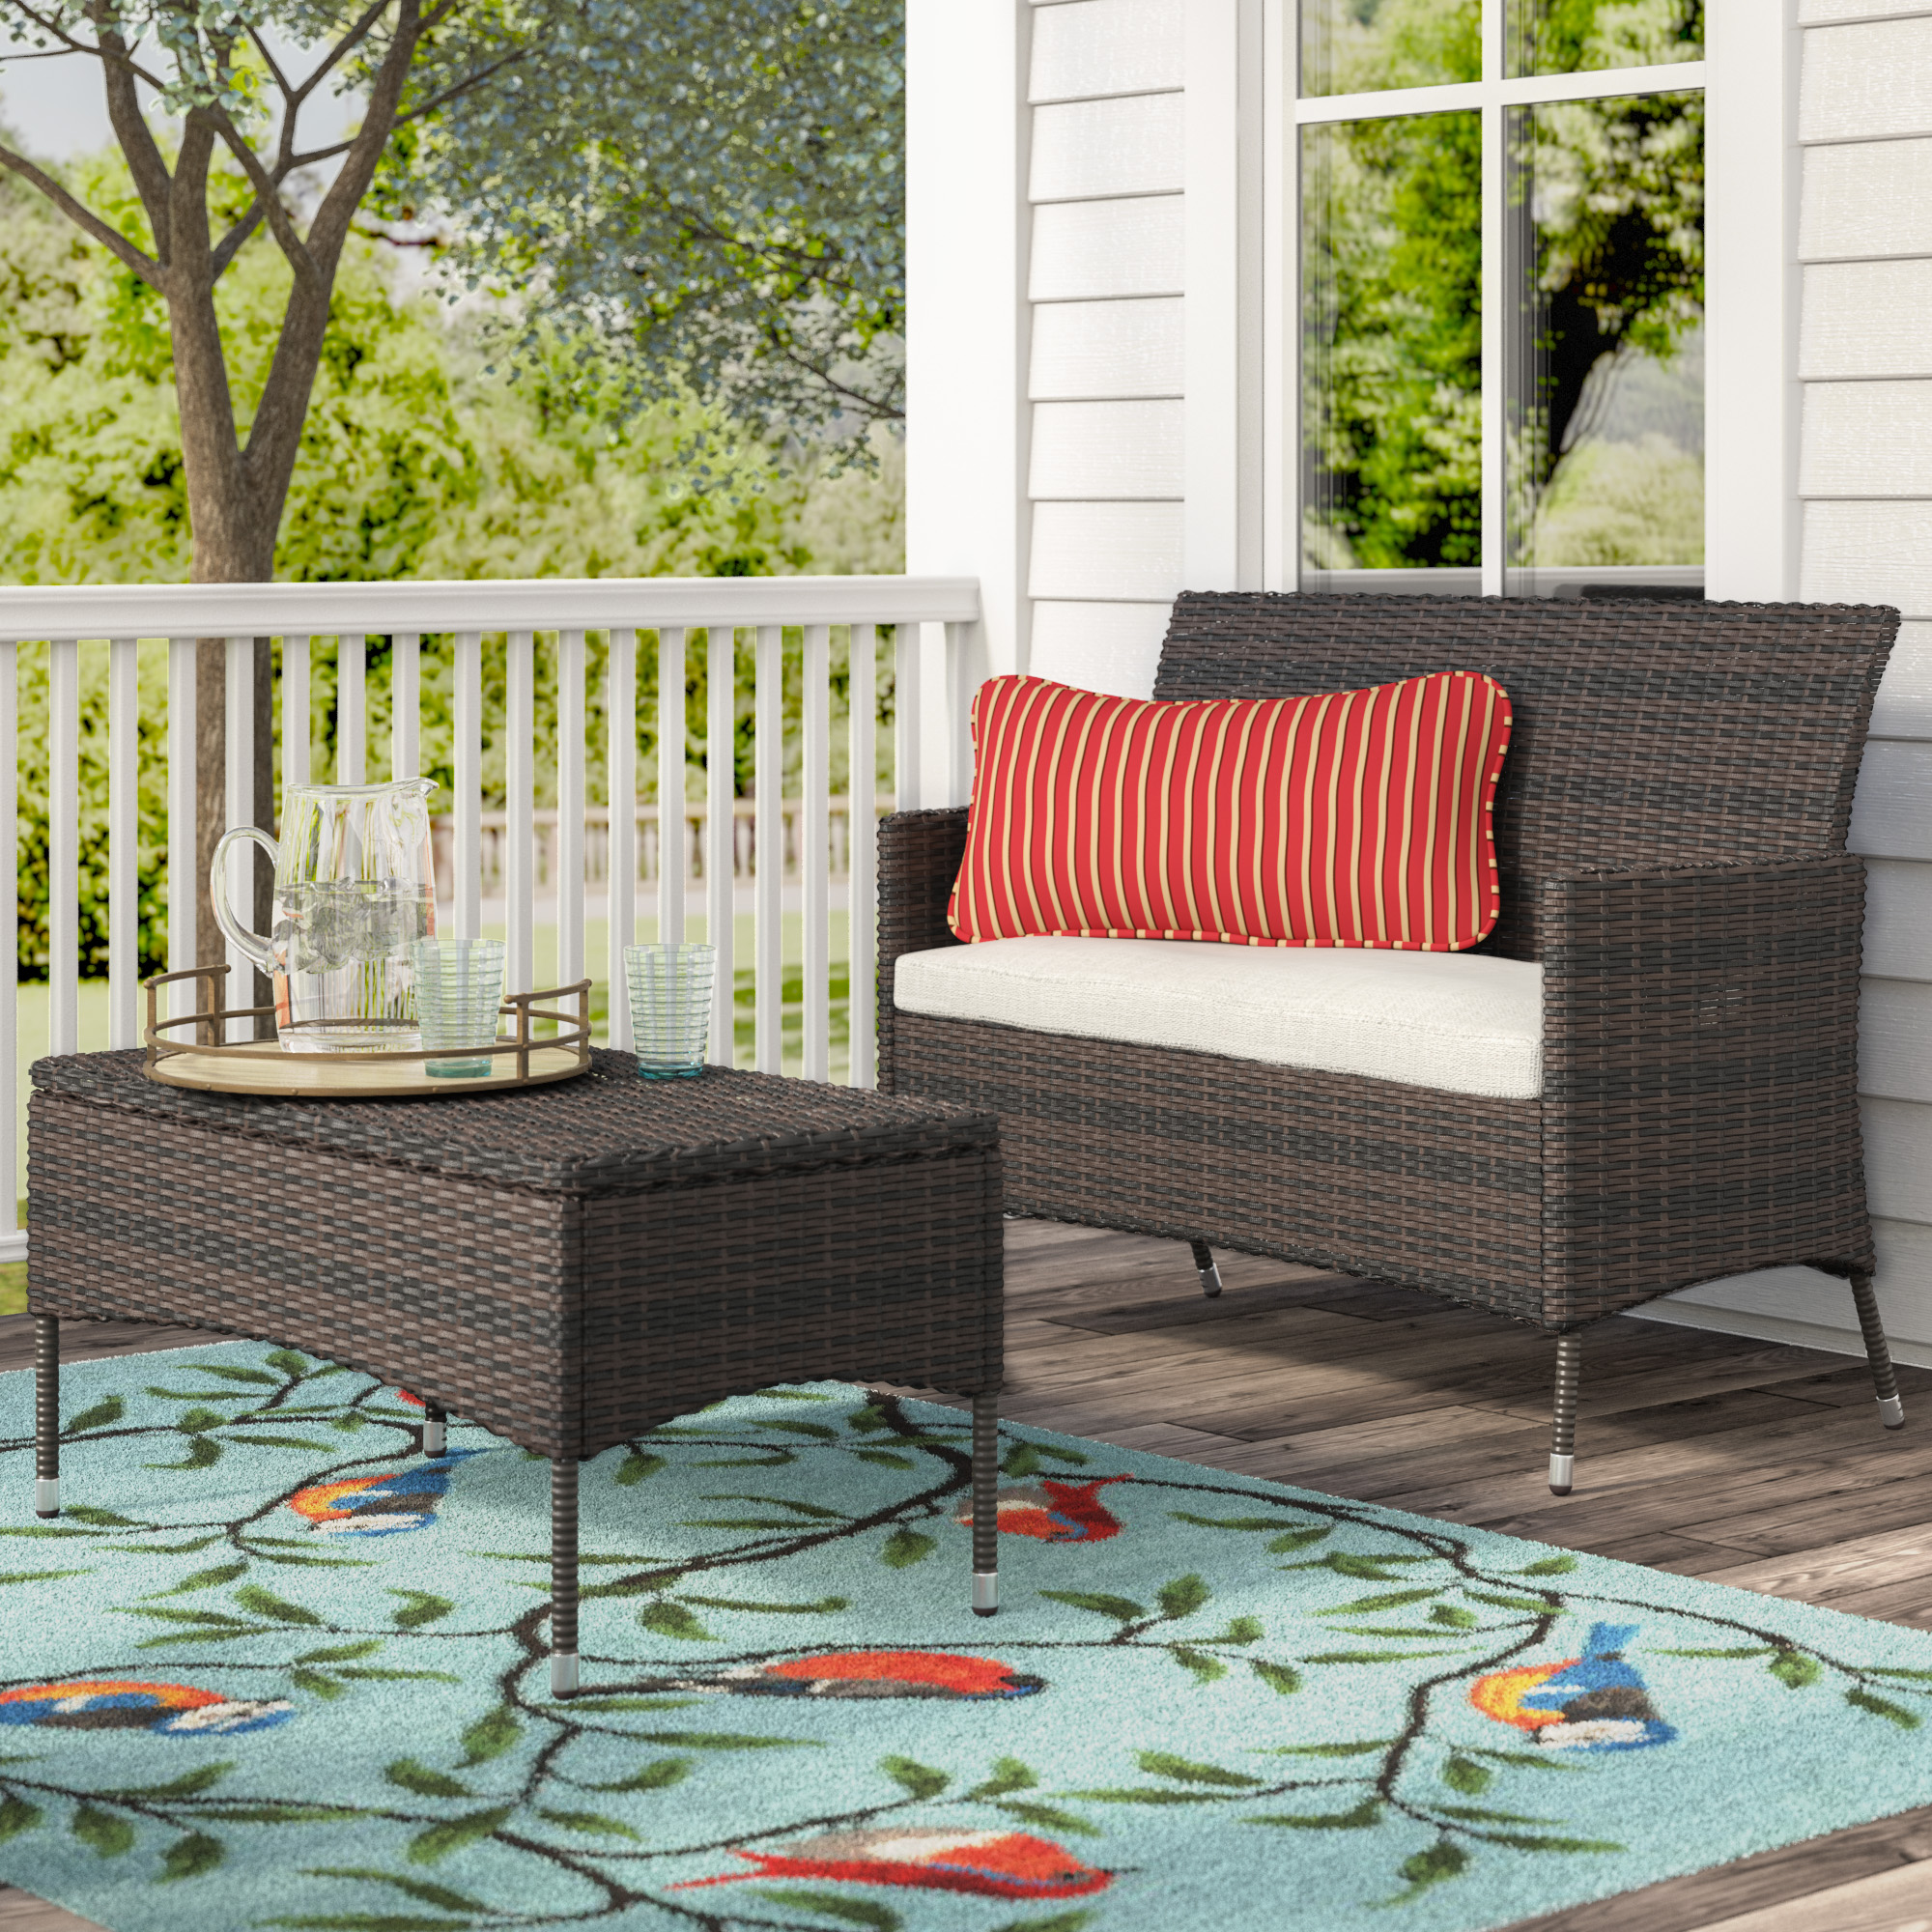 Adorable Loveseat for Patio